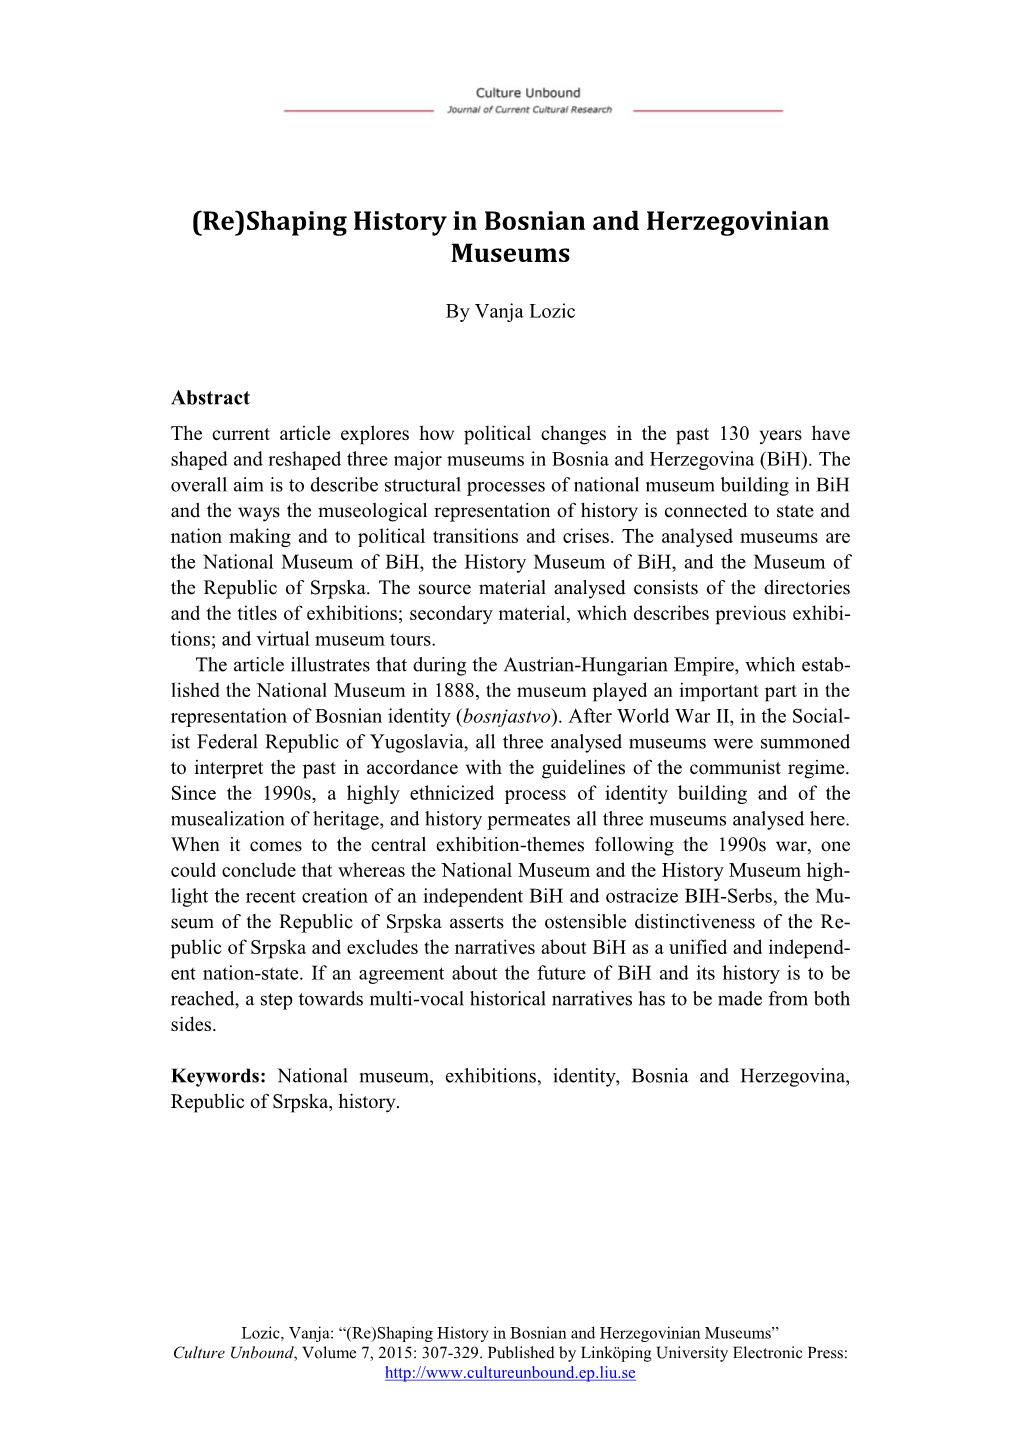 (Re)Shaping History in Bosnian and Herzegovinian Museums